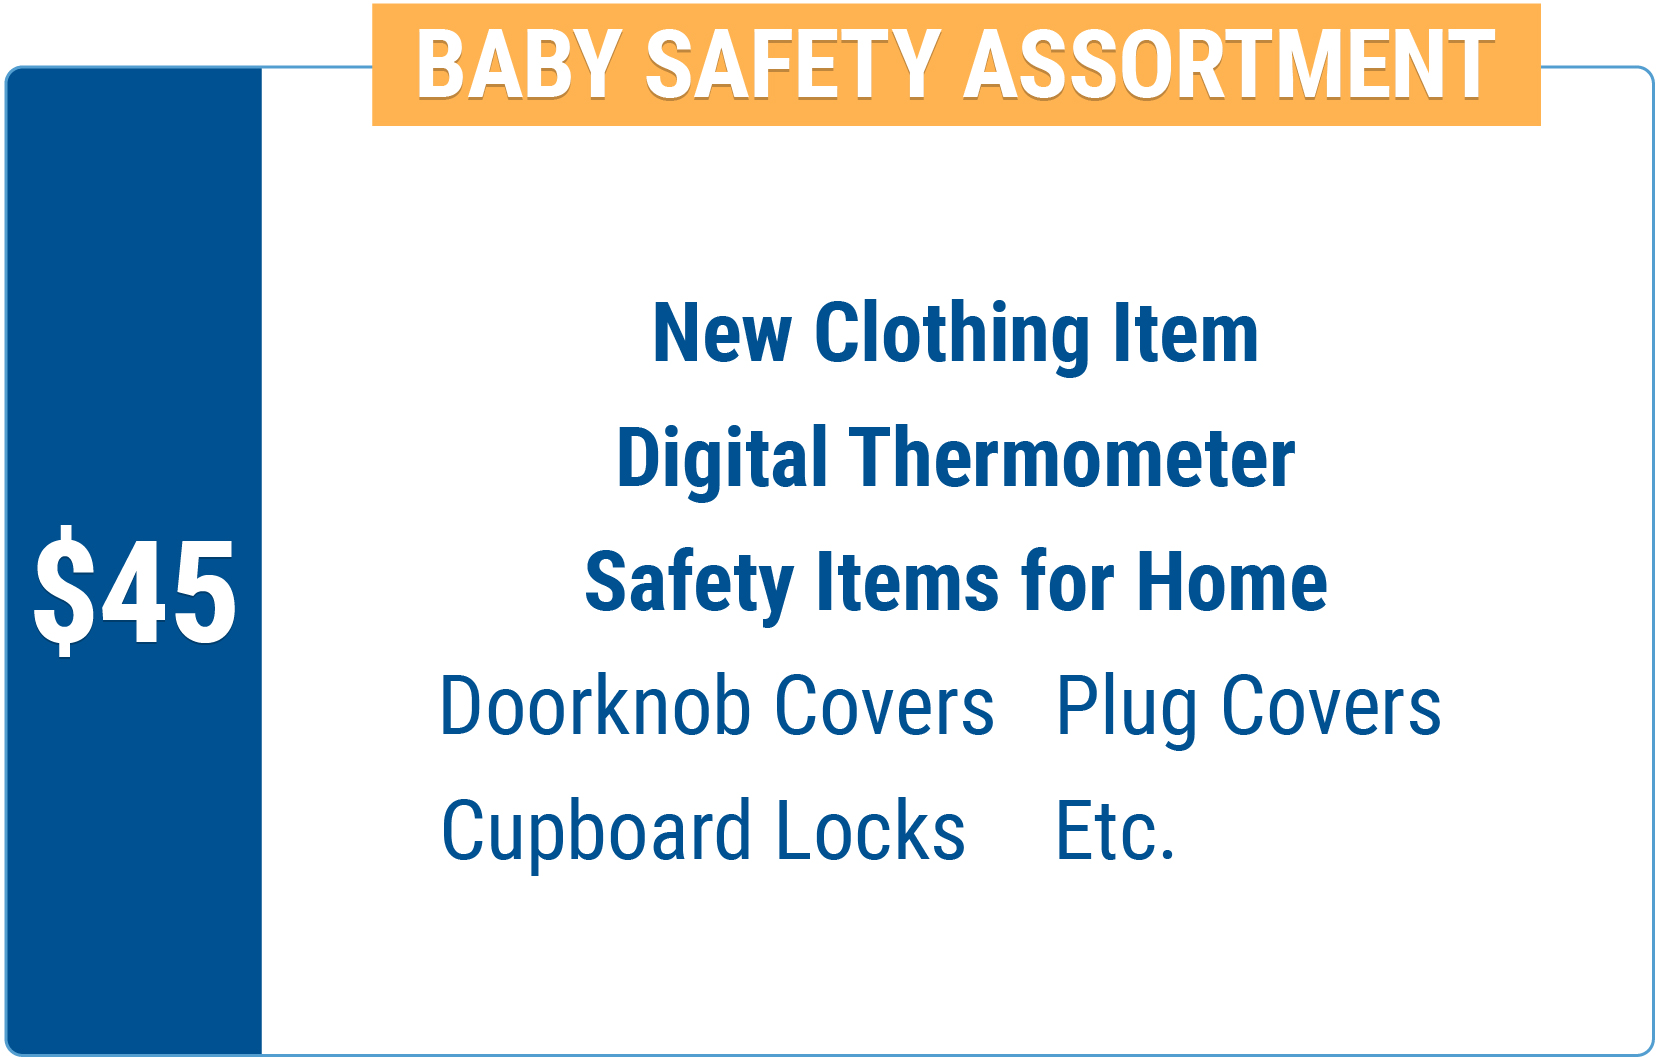 45$ Donation equals new clothing item, digital thermometer, safety items for home